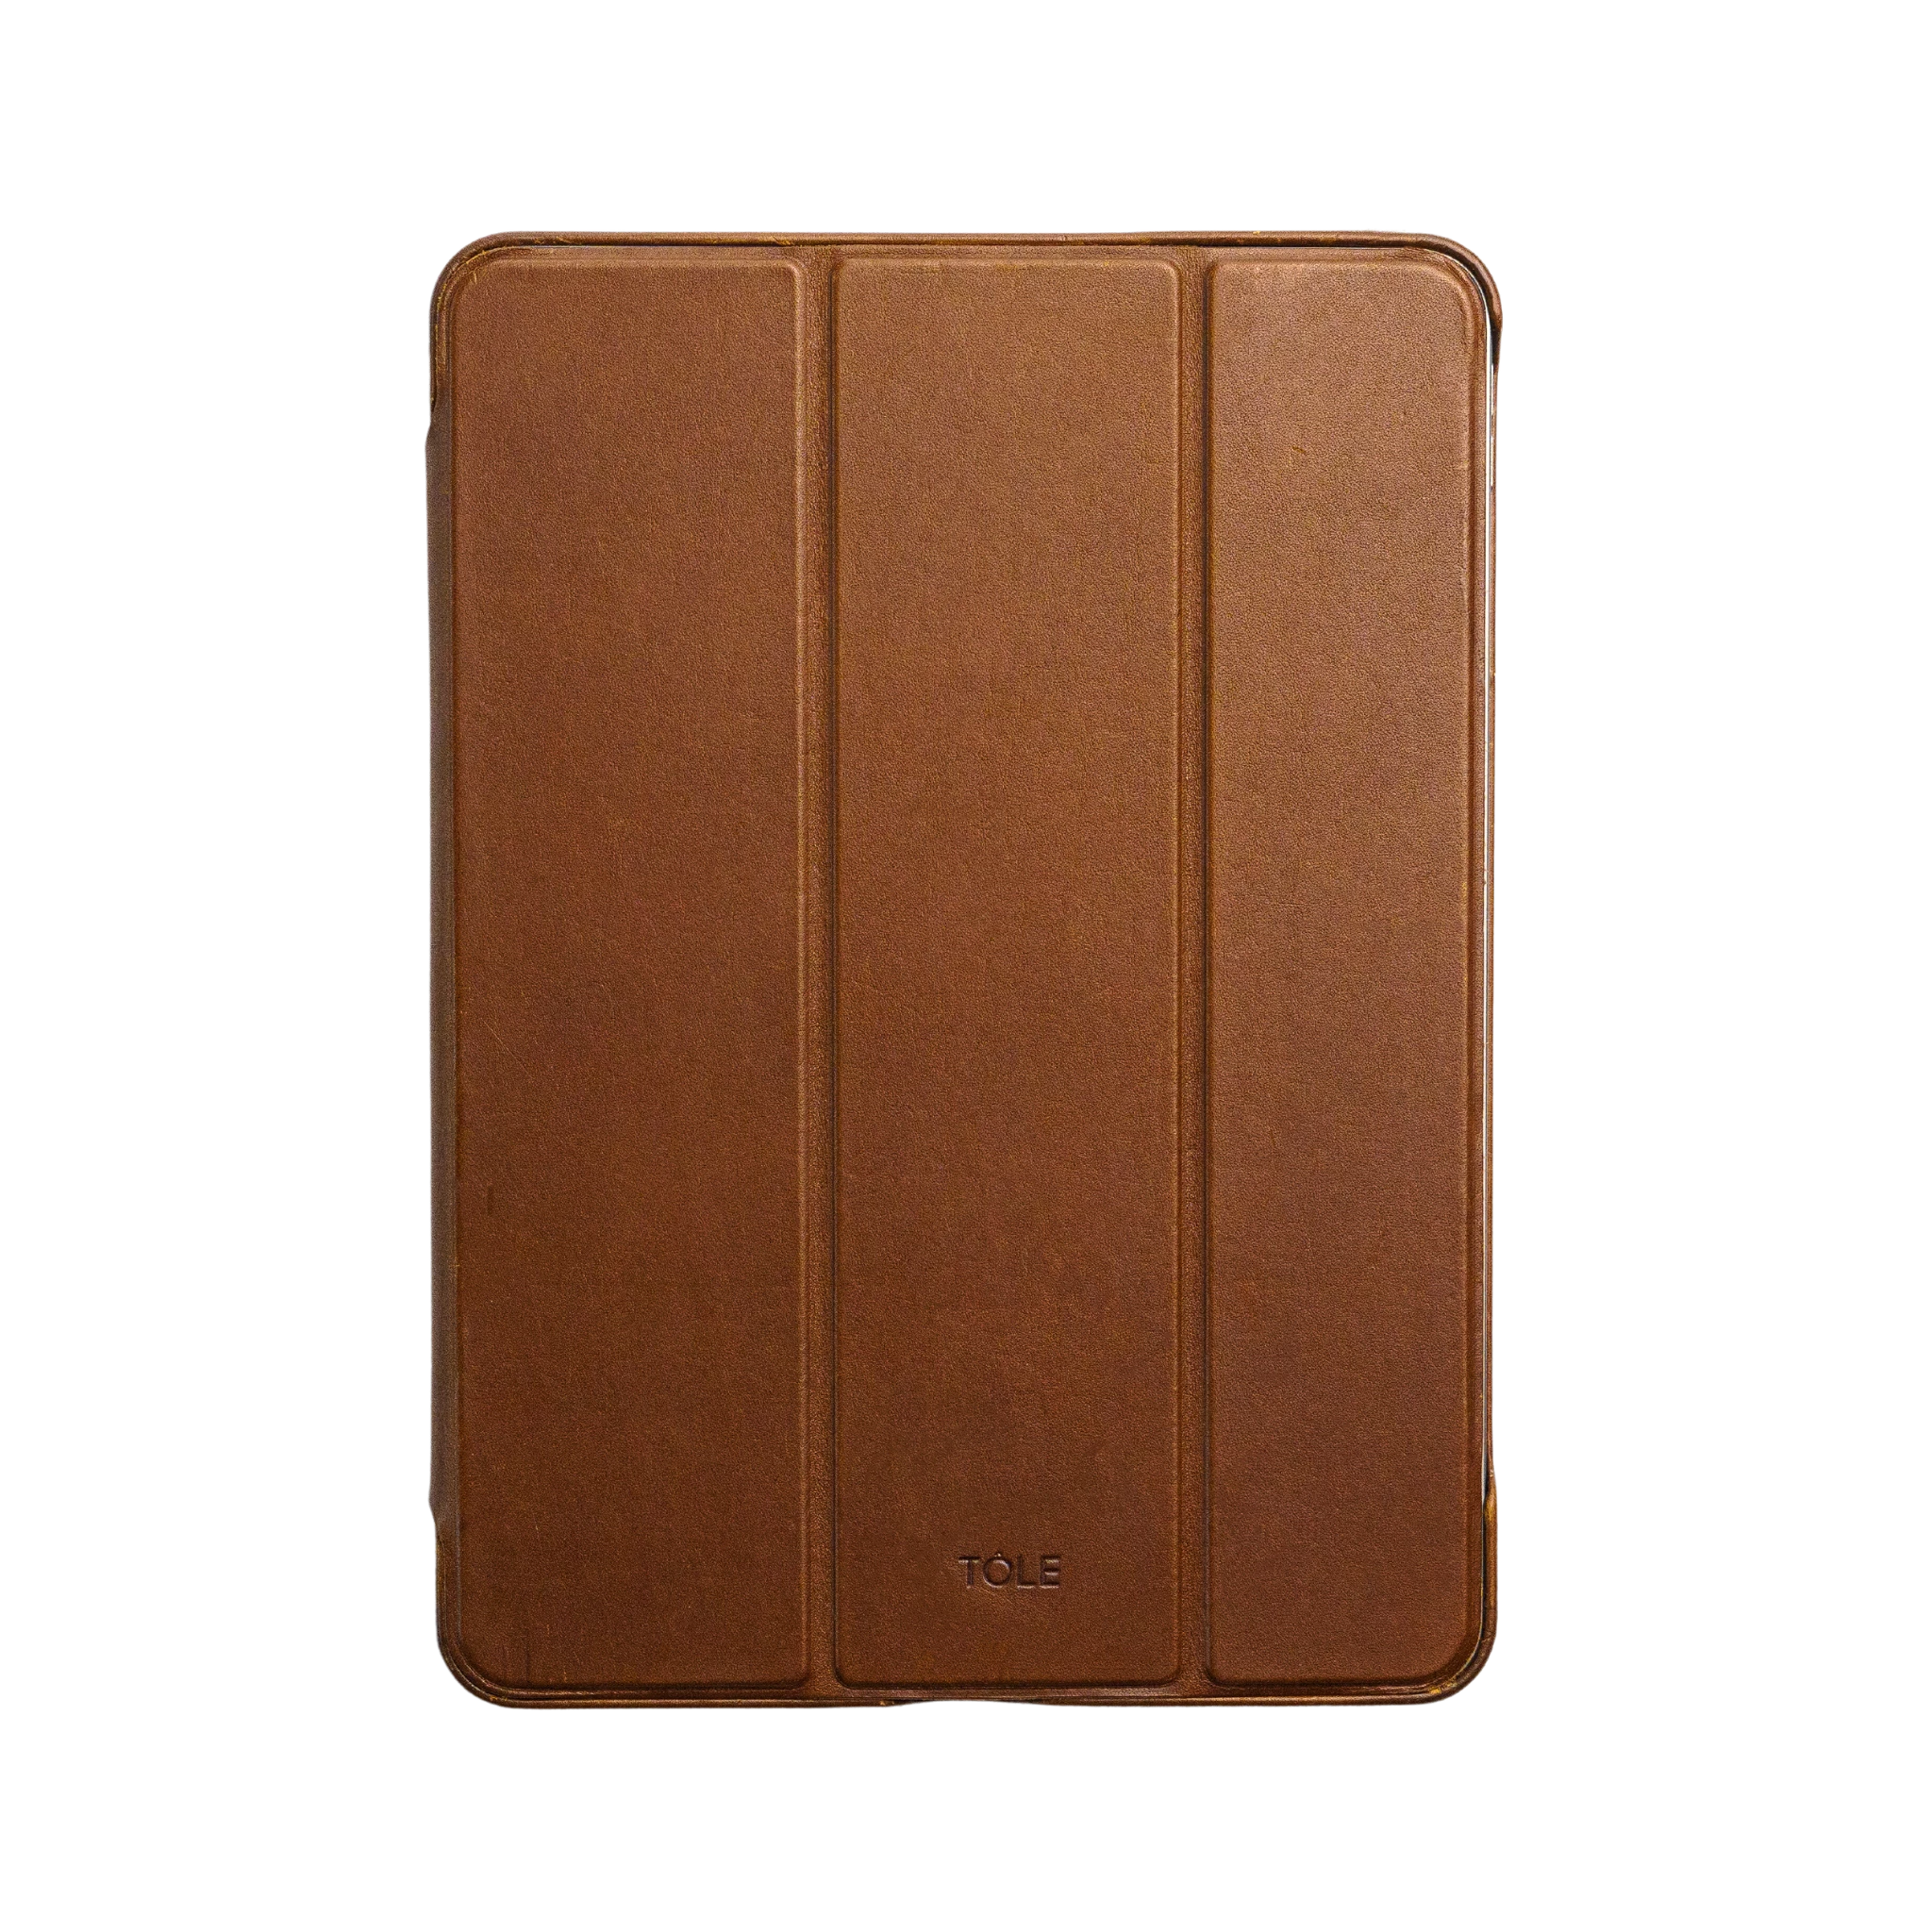 DTTO iPad 9th/8th/7th Generation 10.2 Inch Case 2021/2020/2019, Premium  Leather Business Folio Stand Cover with Built-in Apple Pencil Holder - Auto  Wake/Sleep and Multiple Viewing Angles, Dark Brown : Amazon.in: Computers &